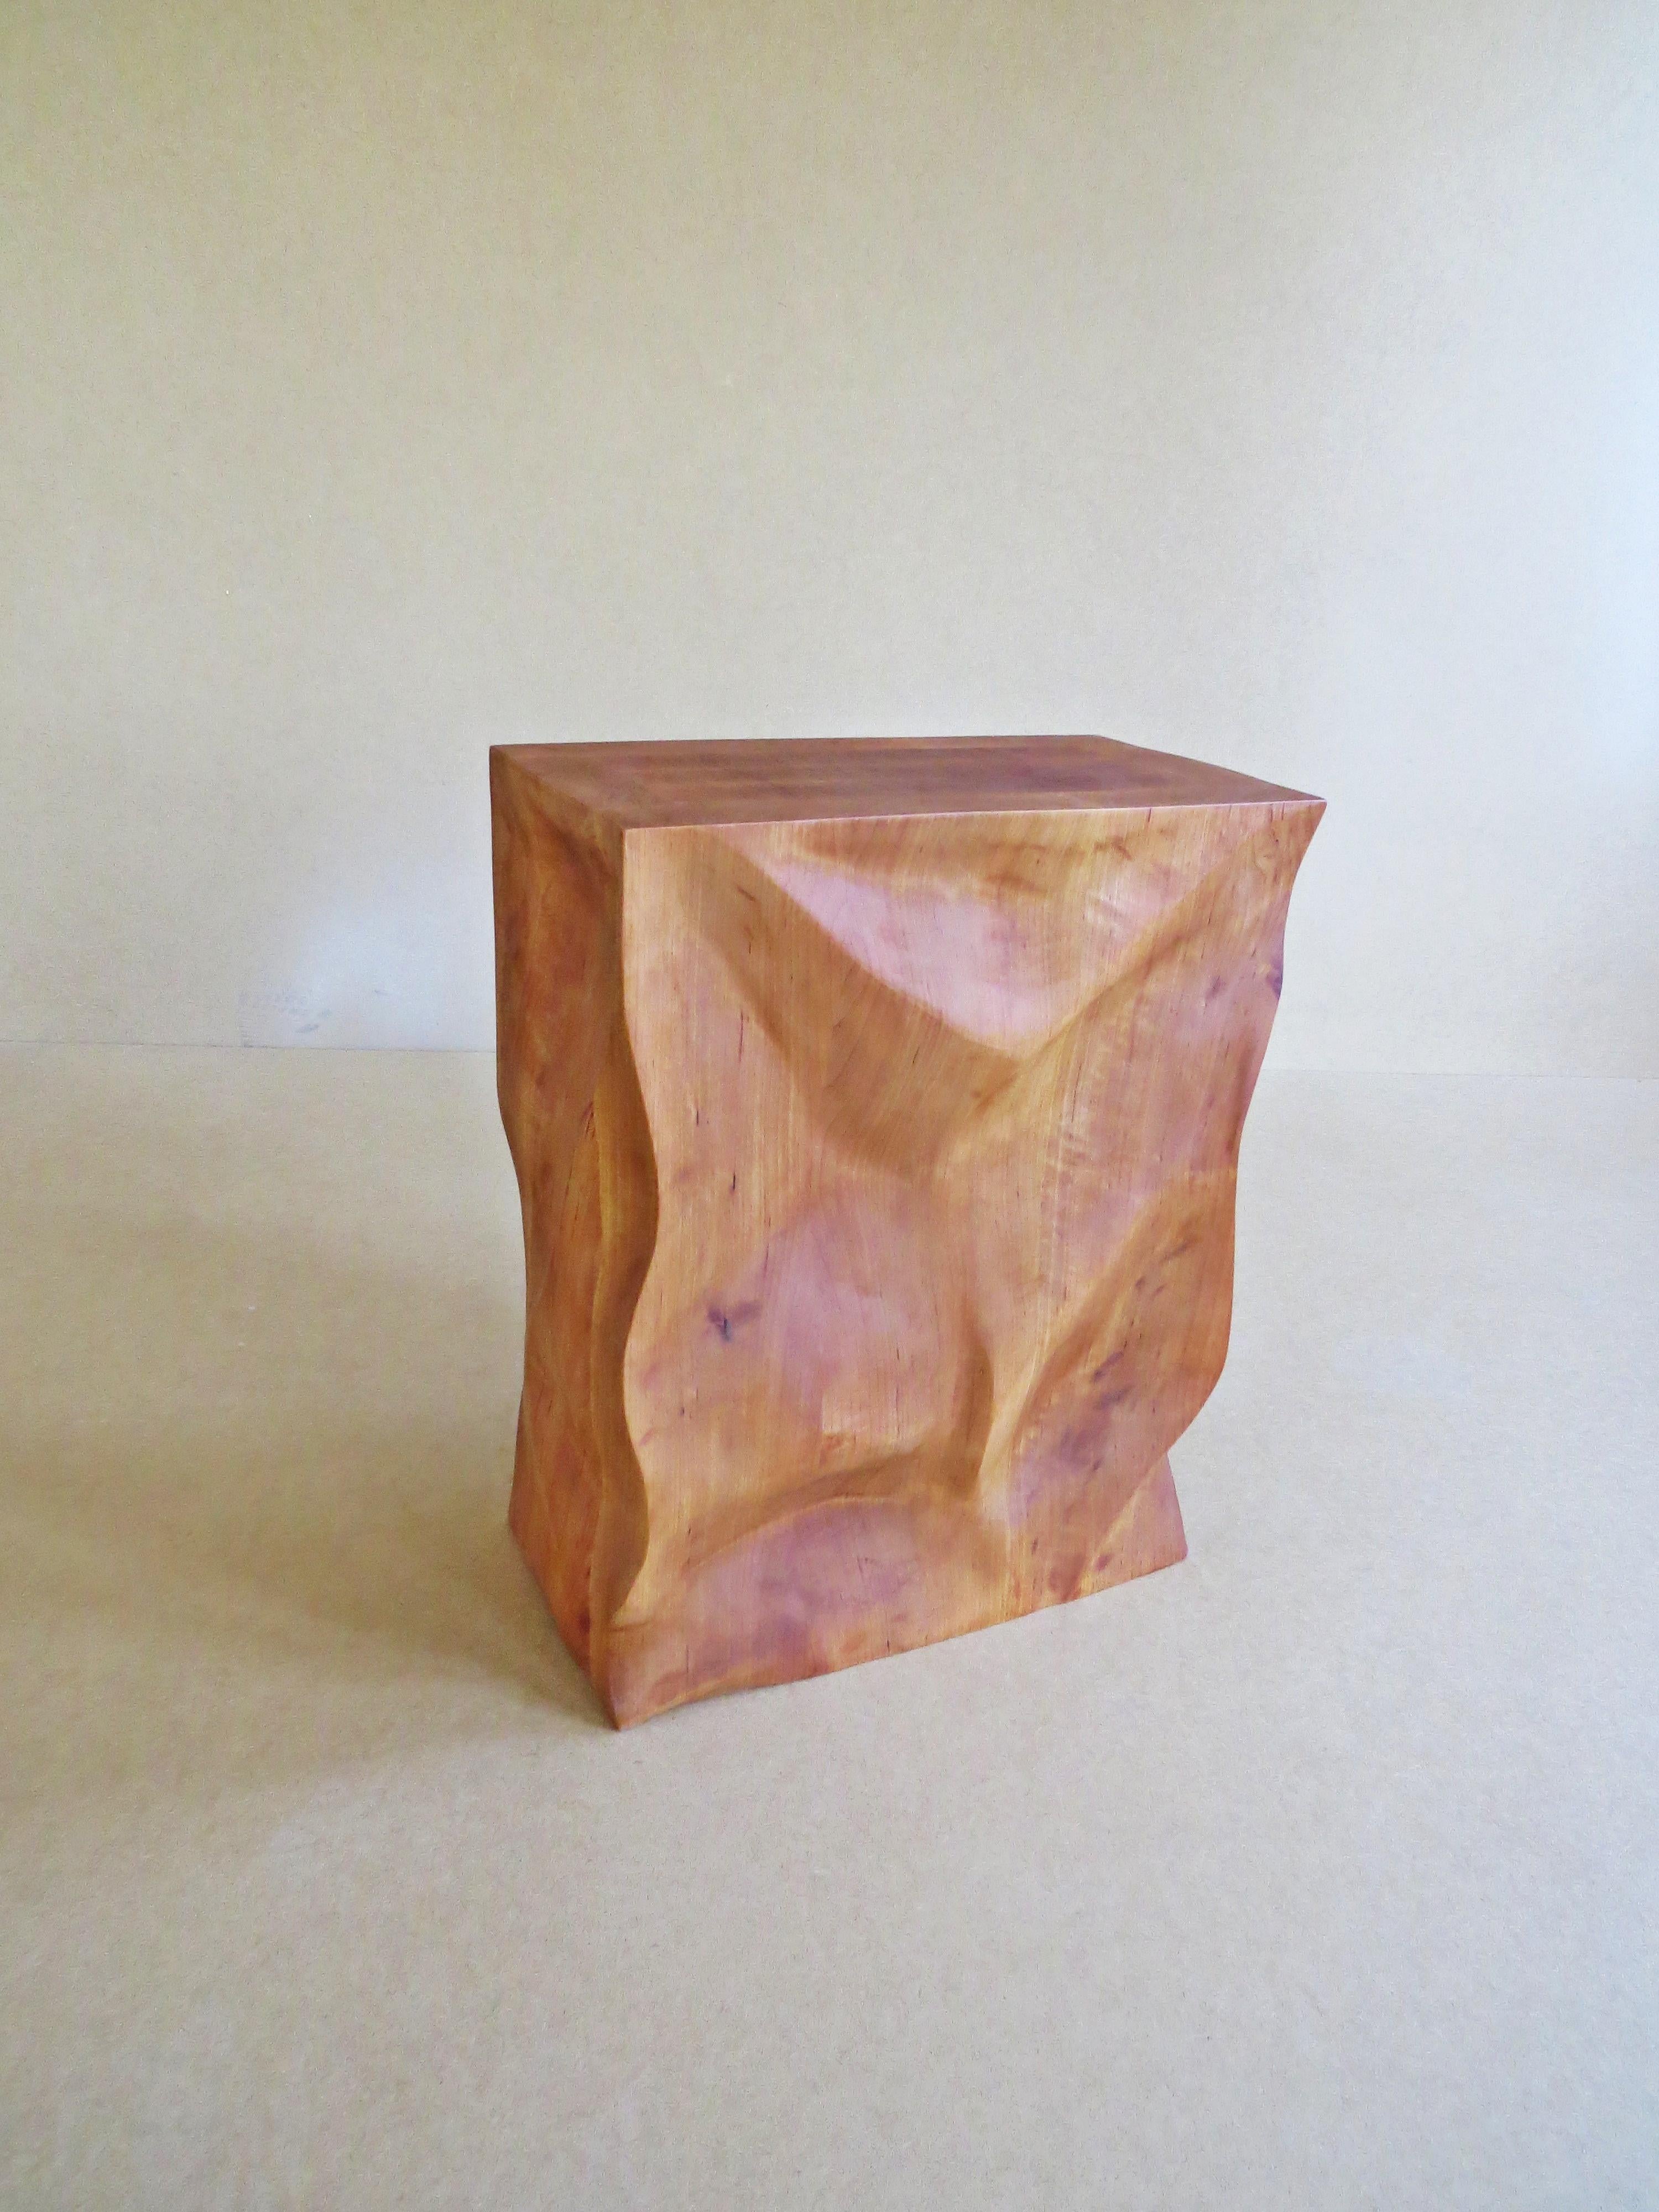 Contemporary Modern, European, 21st Century, Side Table, Stool, Solid Wood, Sculptural